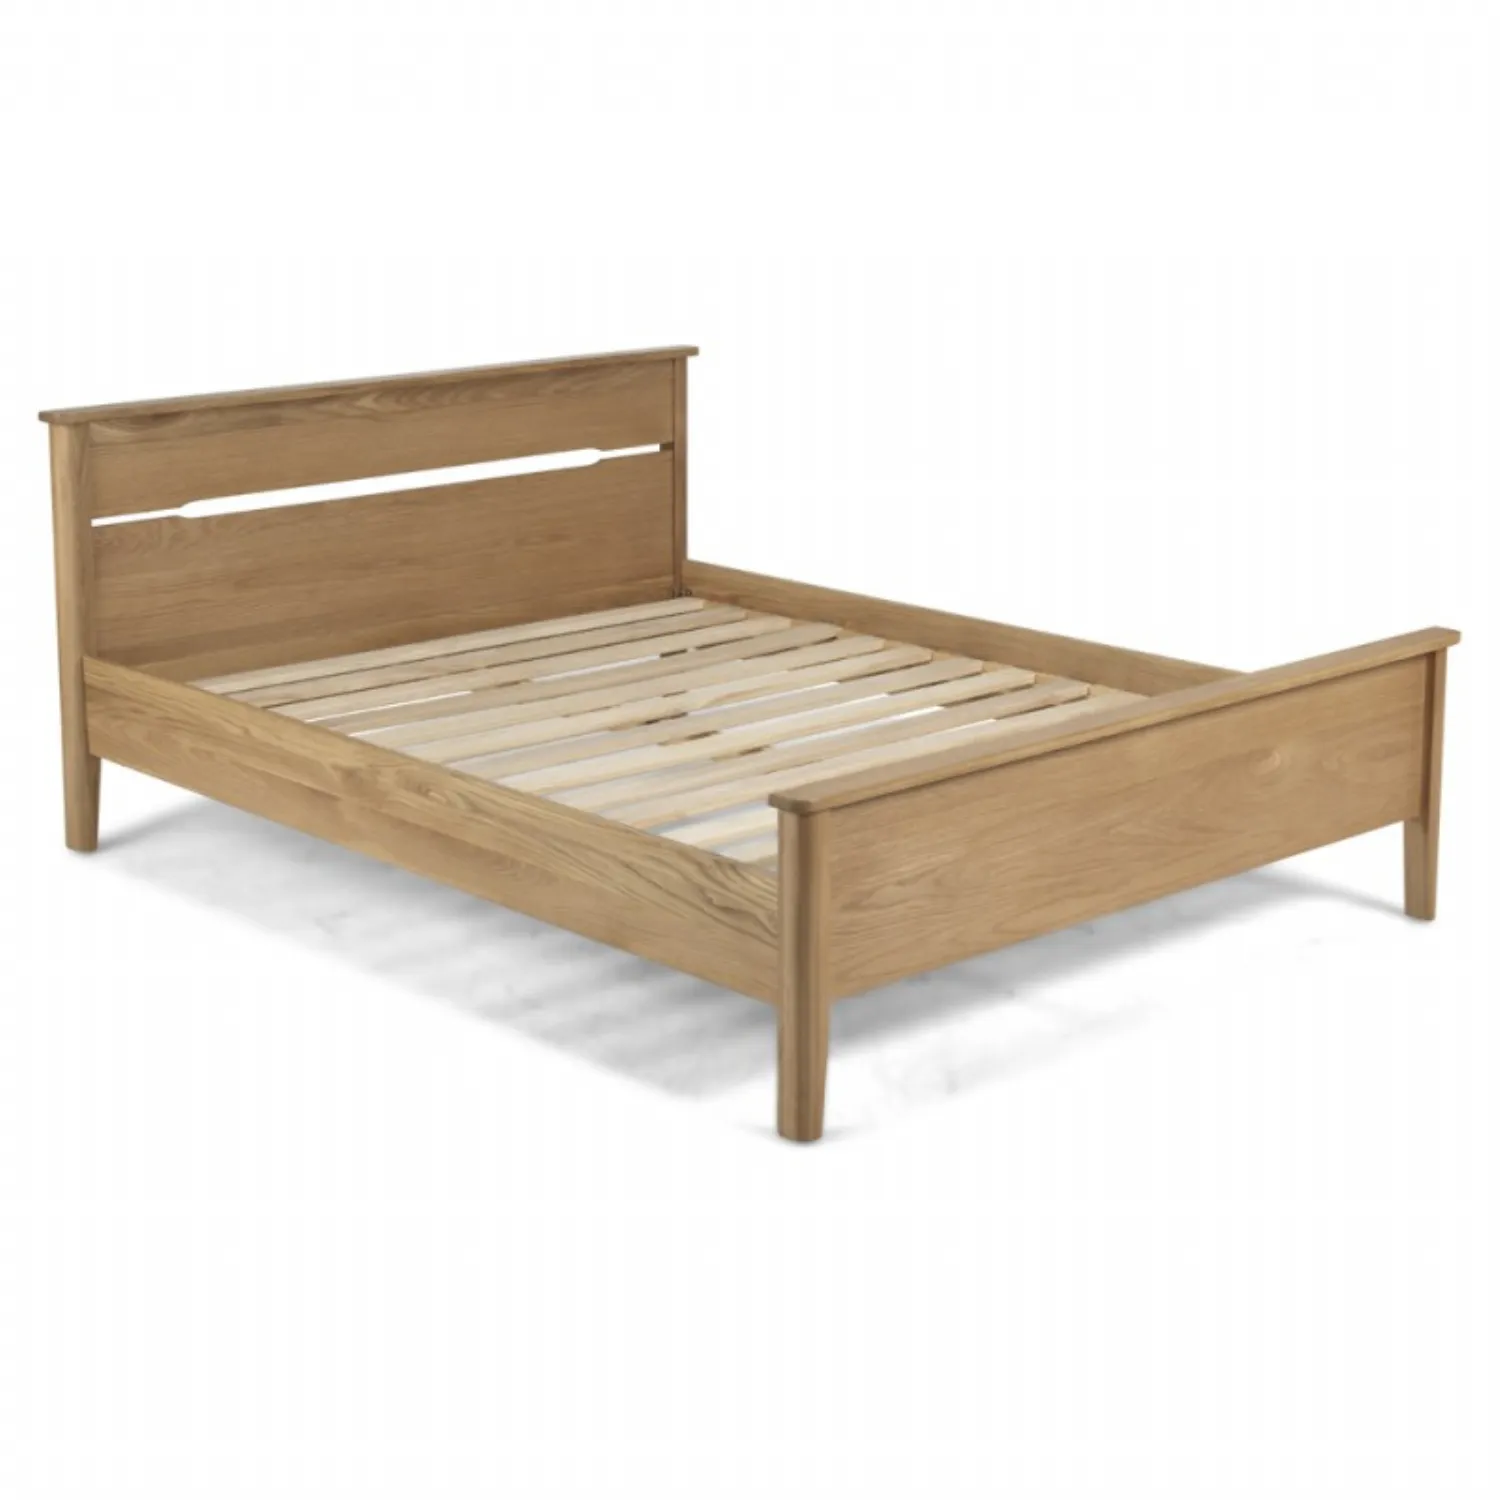 Solid Oak 4ft 6 Double Bed